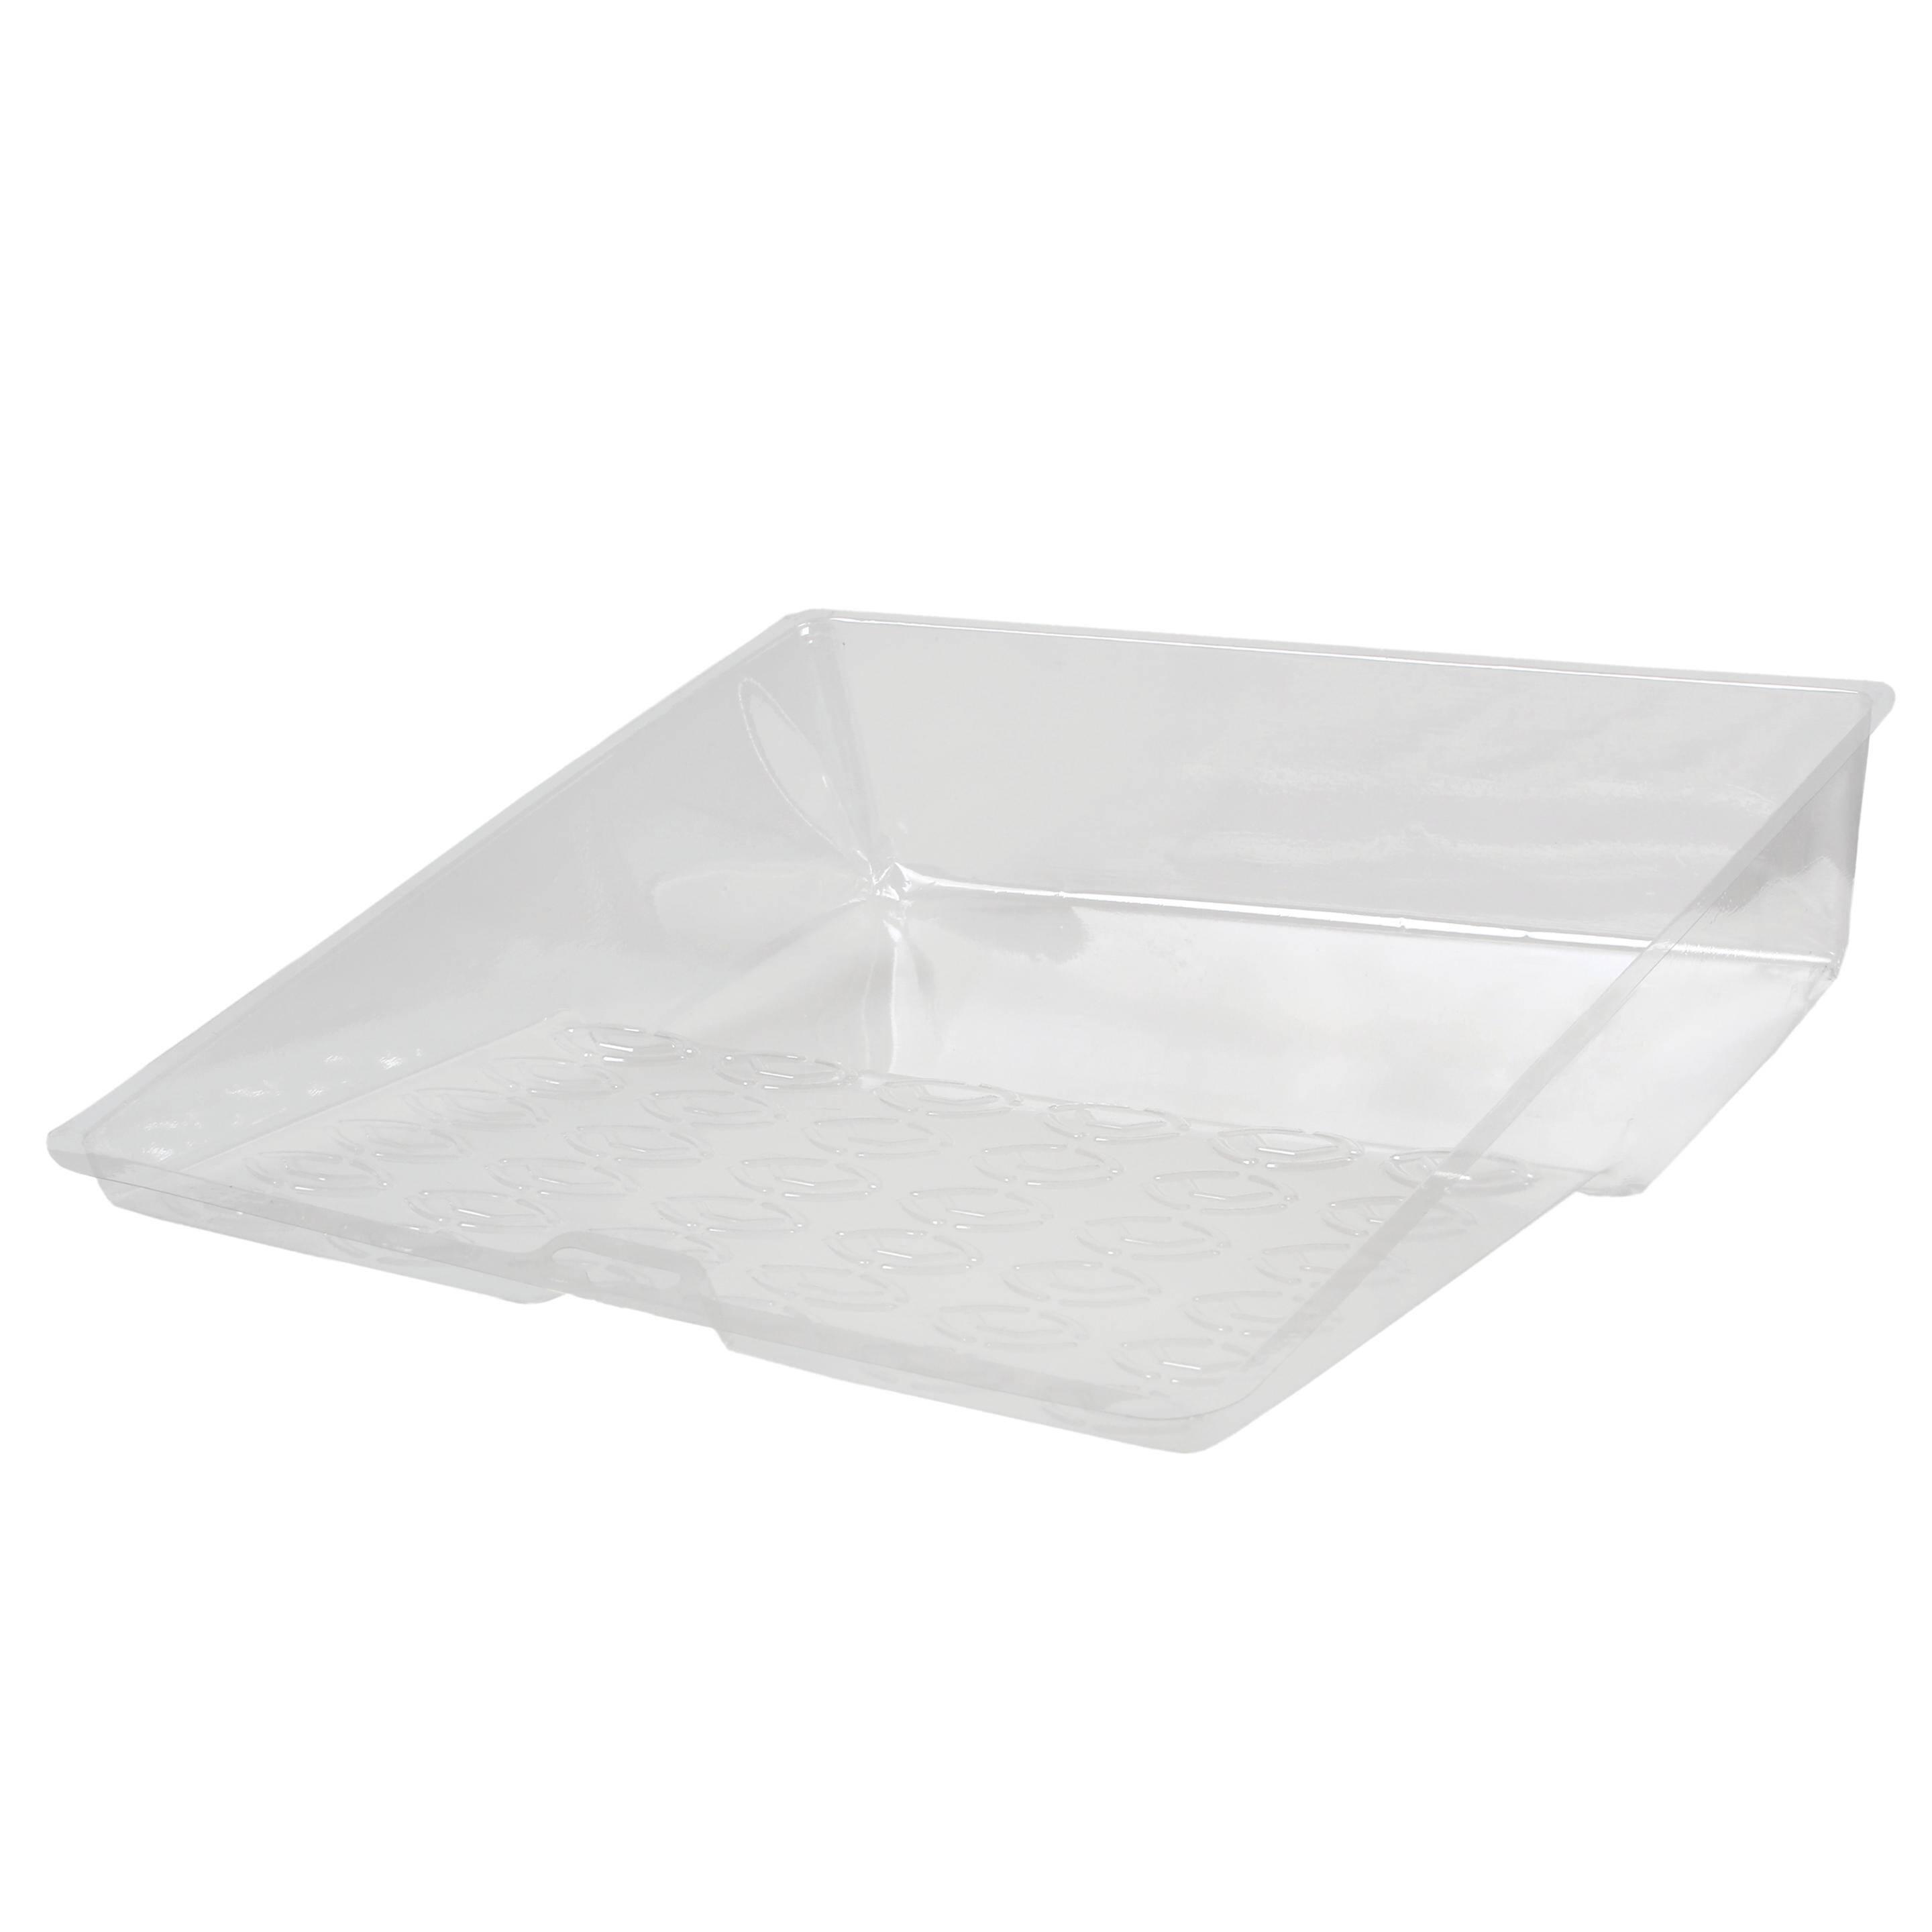 Paint tray liner 25/31cm (Photo 1)